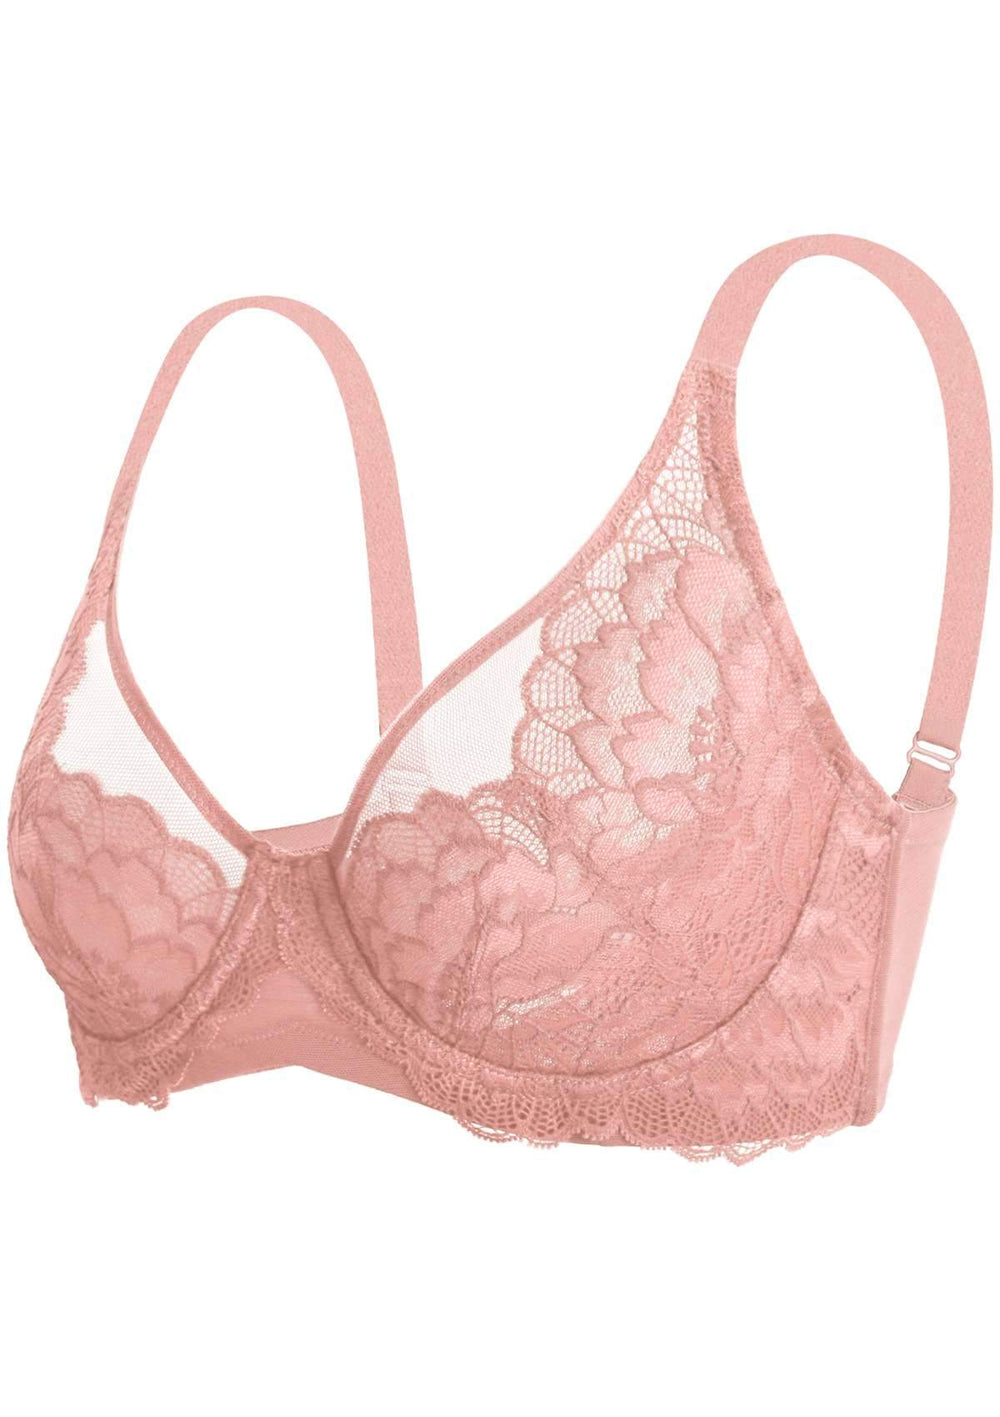 Women pink glamor bra with heart pattern on white background 18062550 PNG